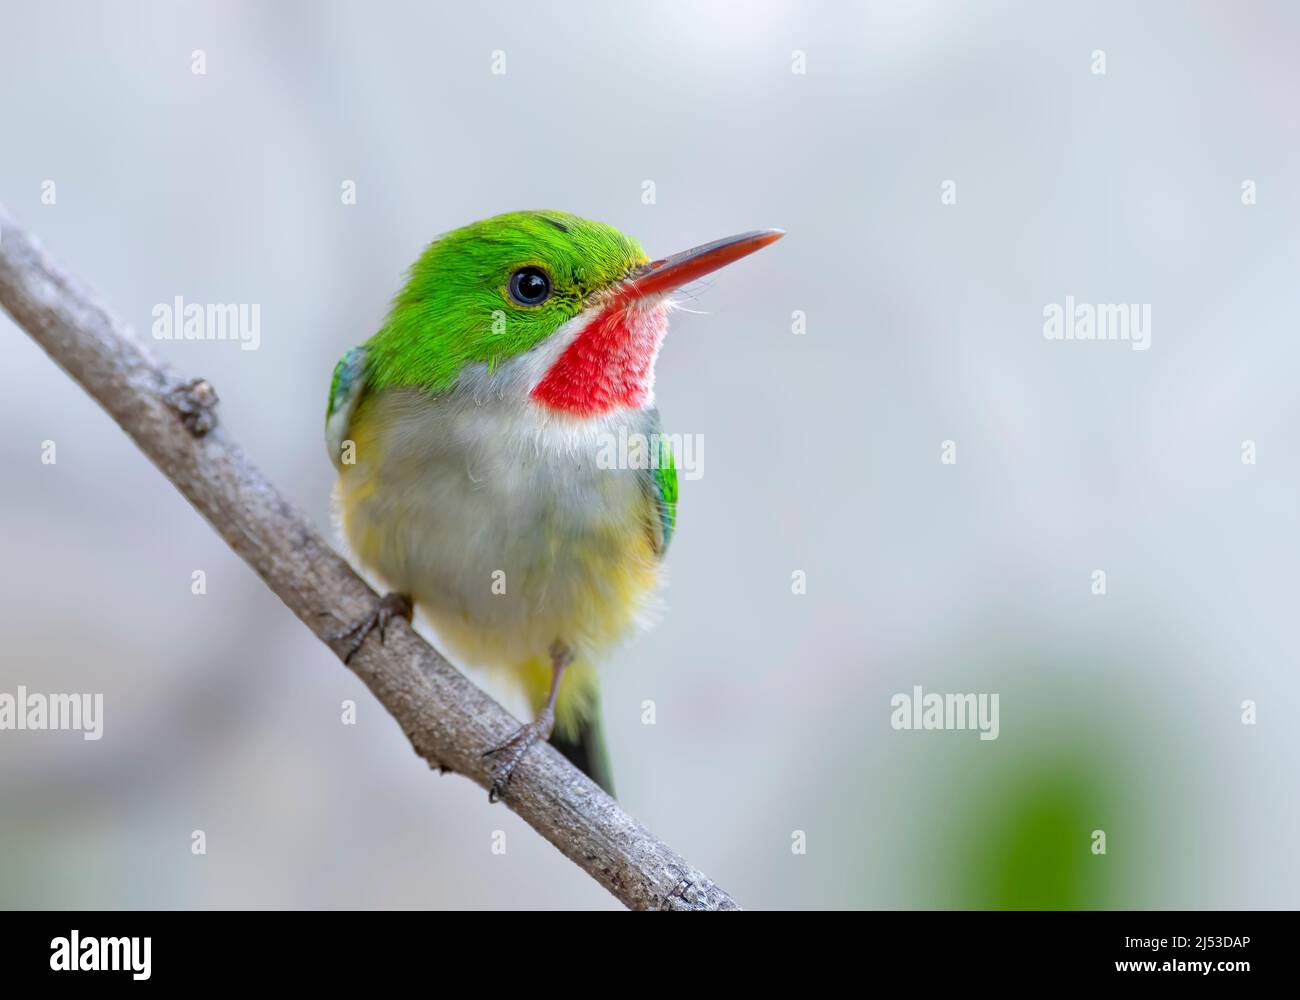 A cute little Puerto Rican Tody perched Stock Photo